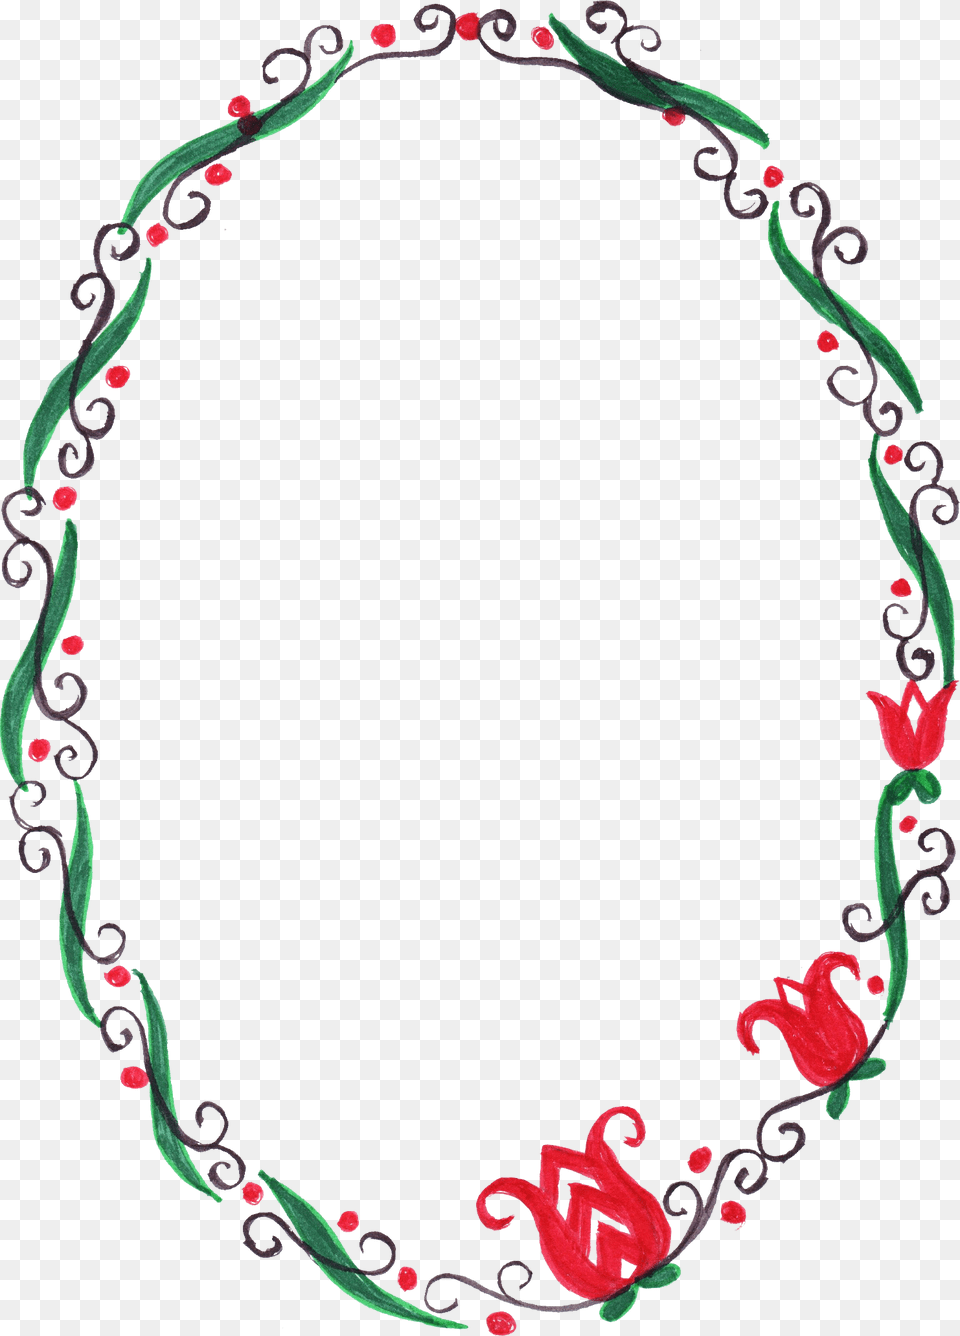 Oval Flower Frame Oval Shape Design Flower, Accessories, Jewelry, Necklace Free Png Download